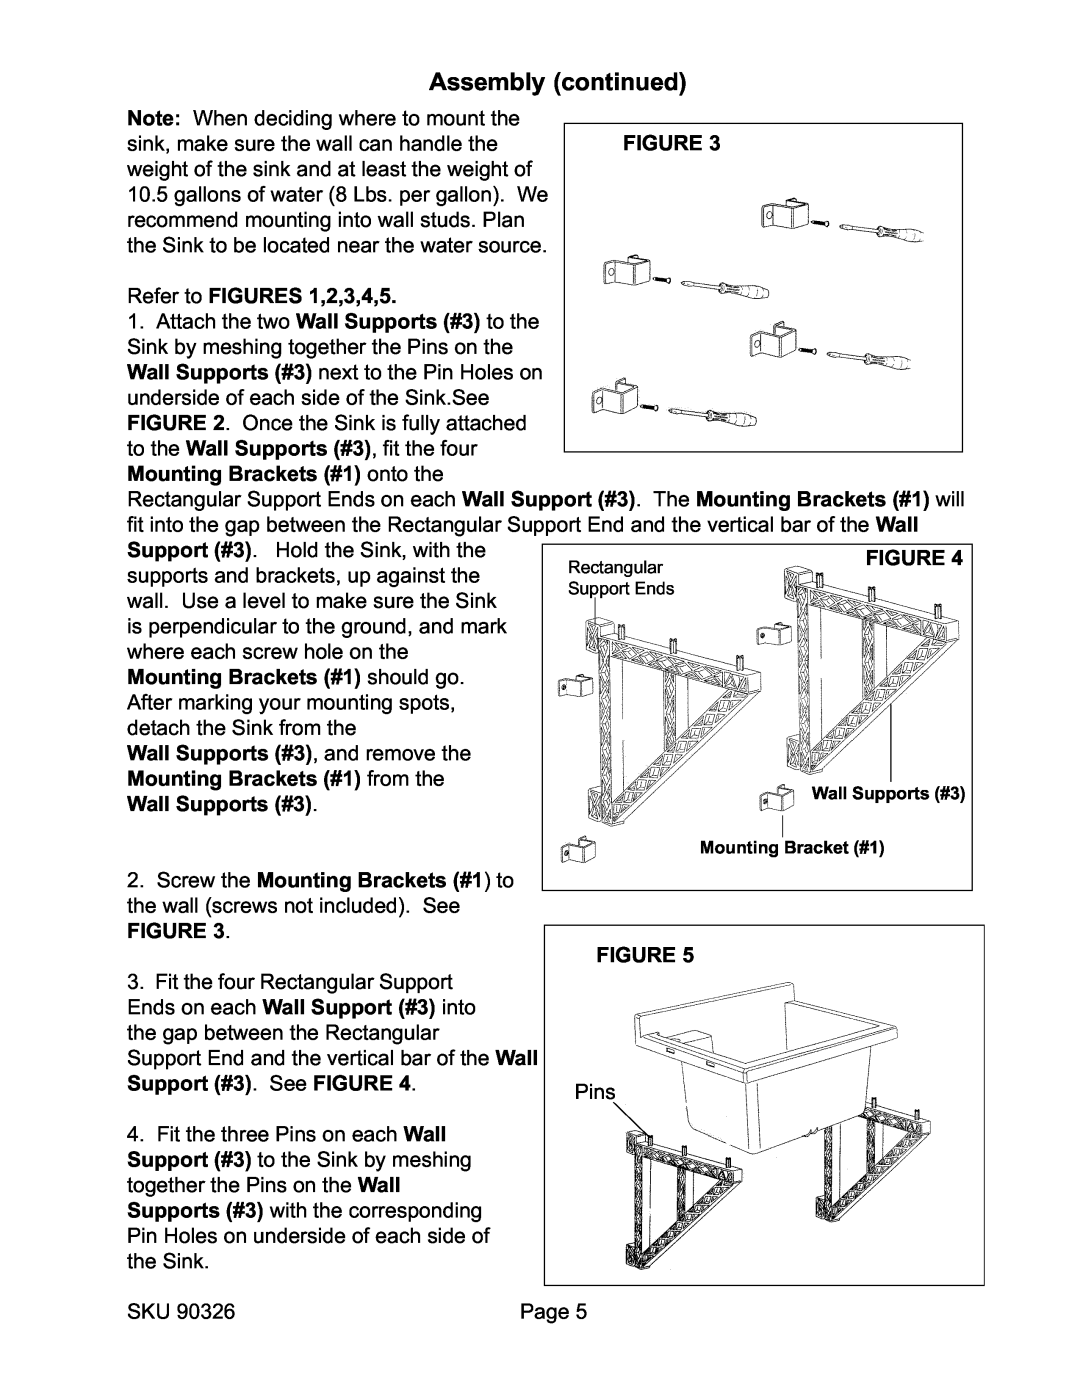 Harbor Freight Tools 90326 operating instructions Assembly continued 